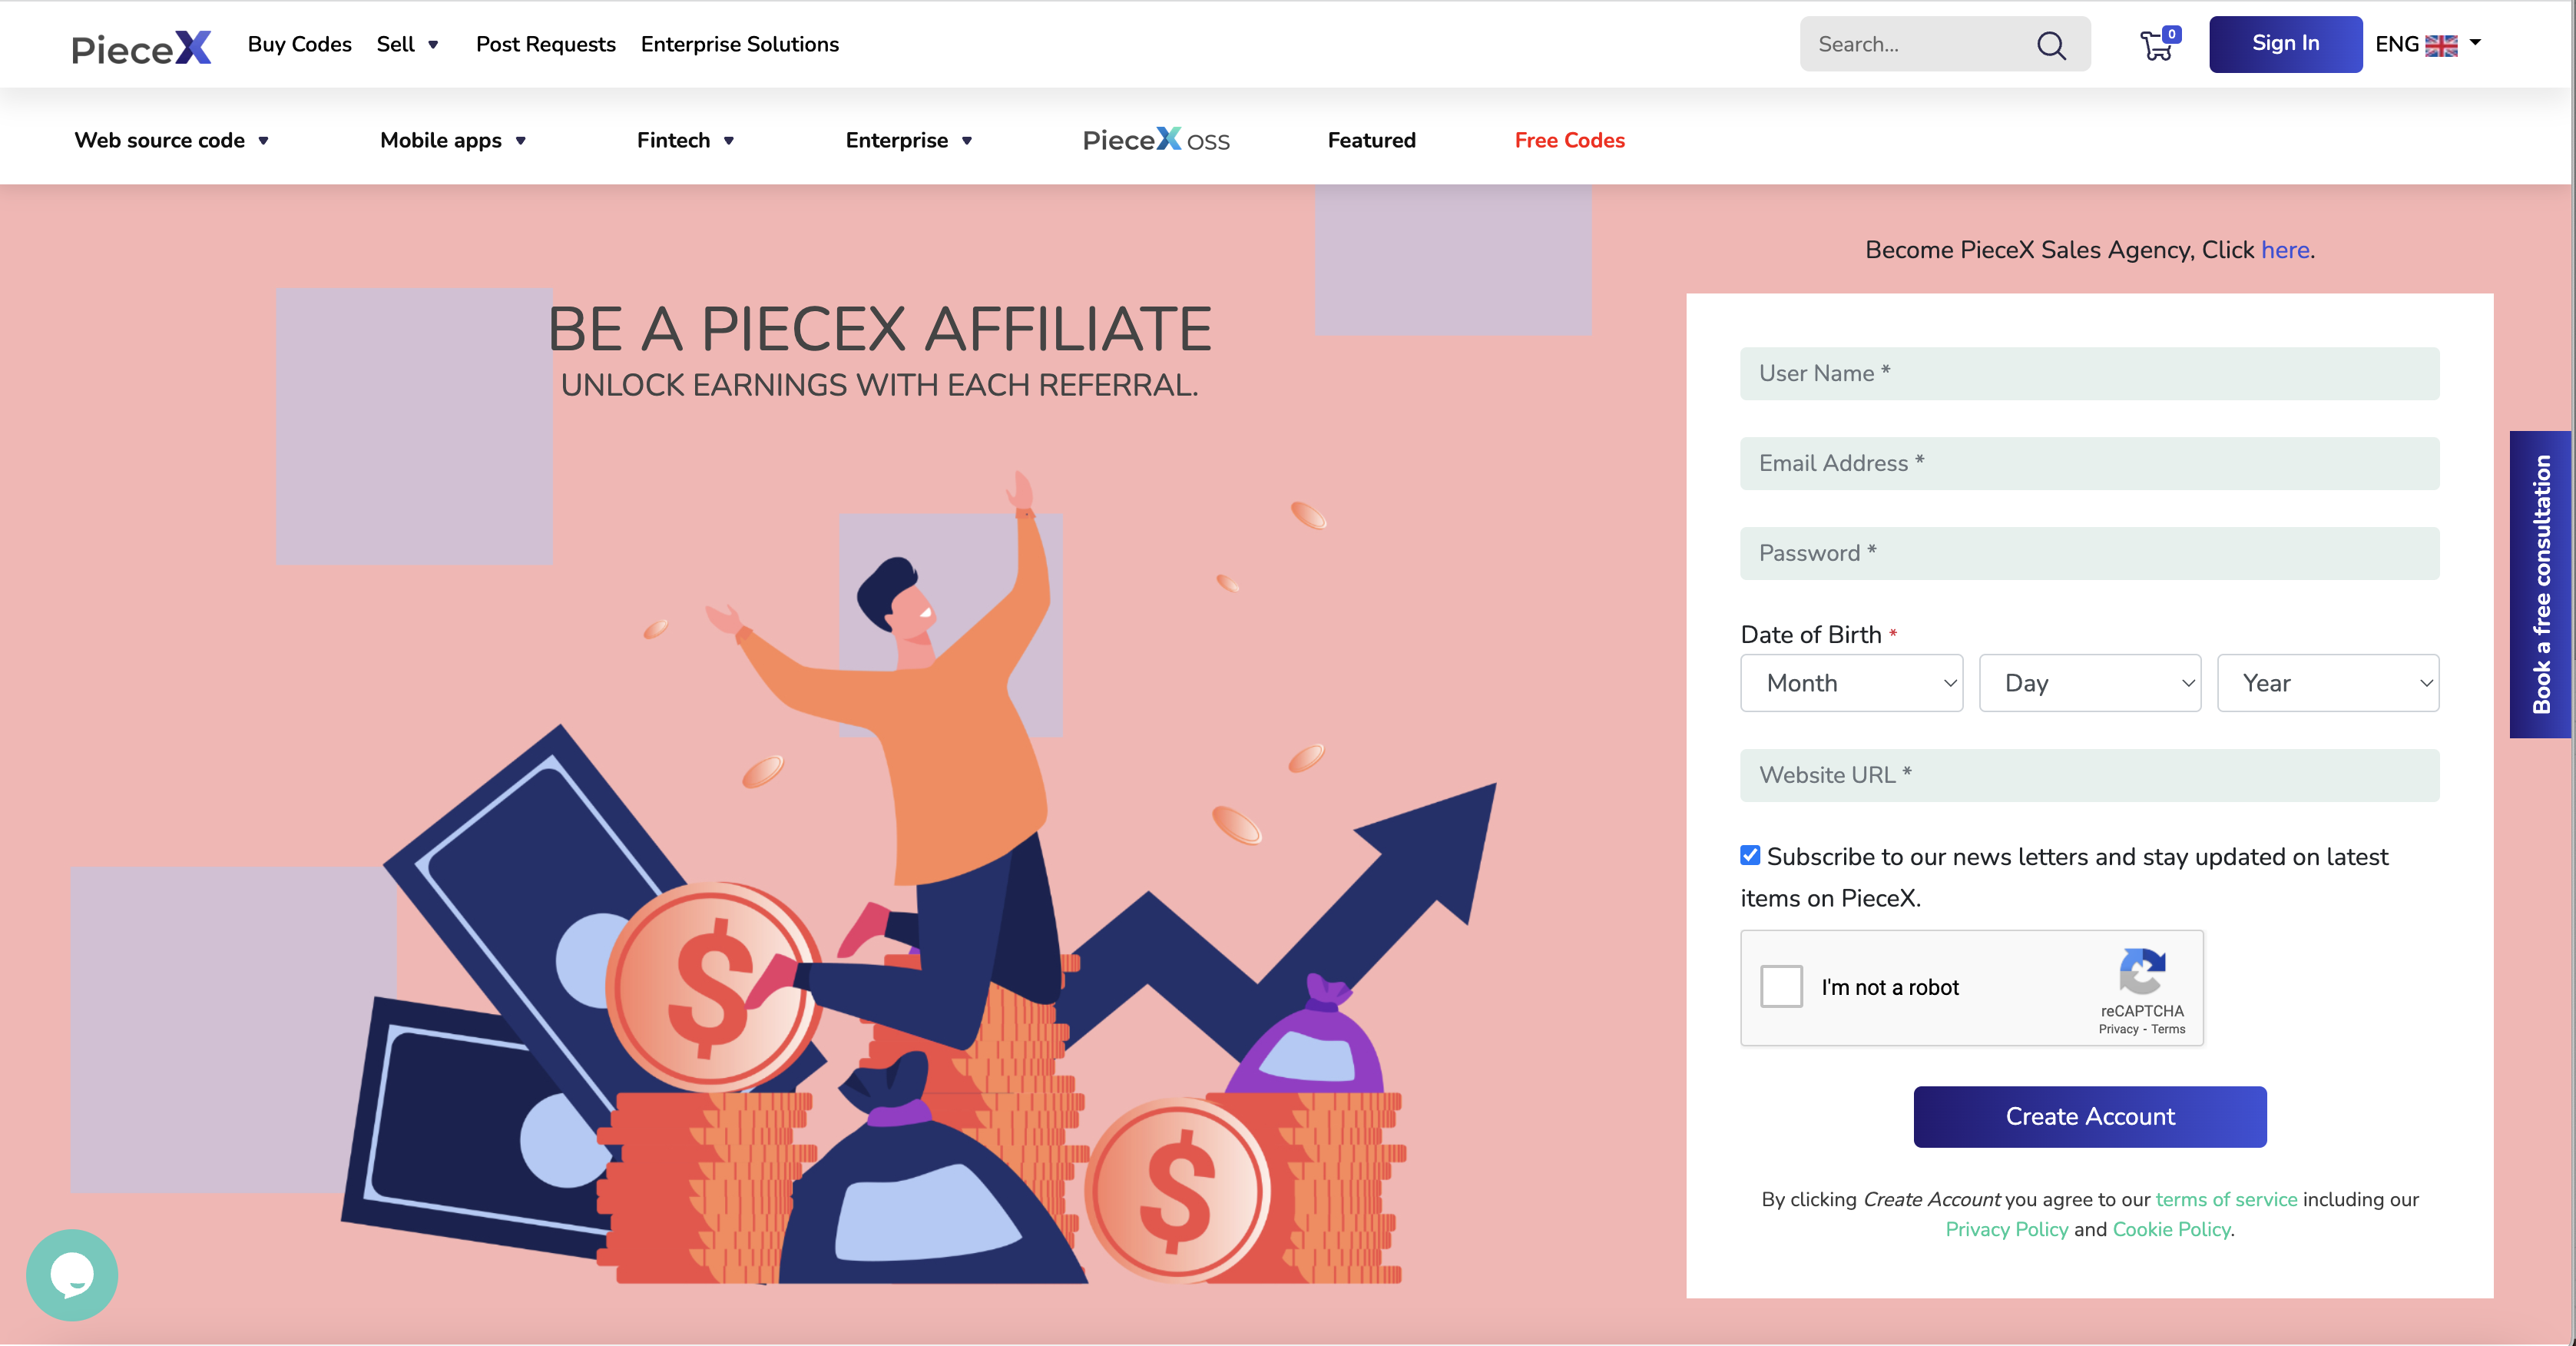 How To Become A PieceX Affiliate - Create Account